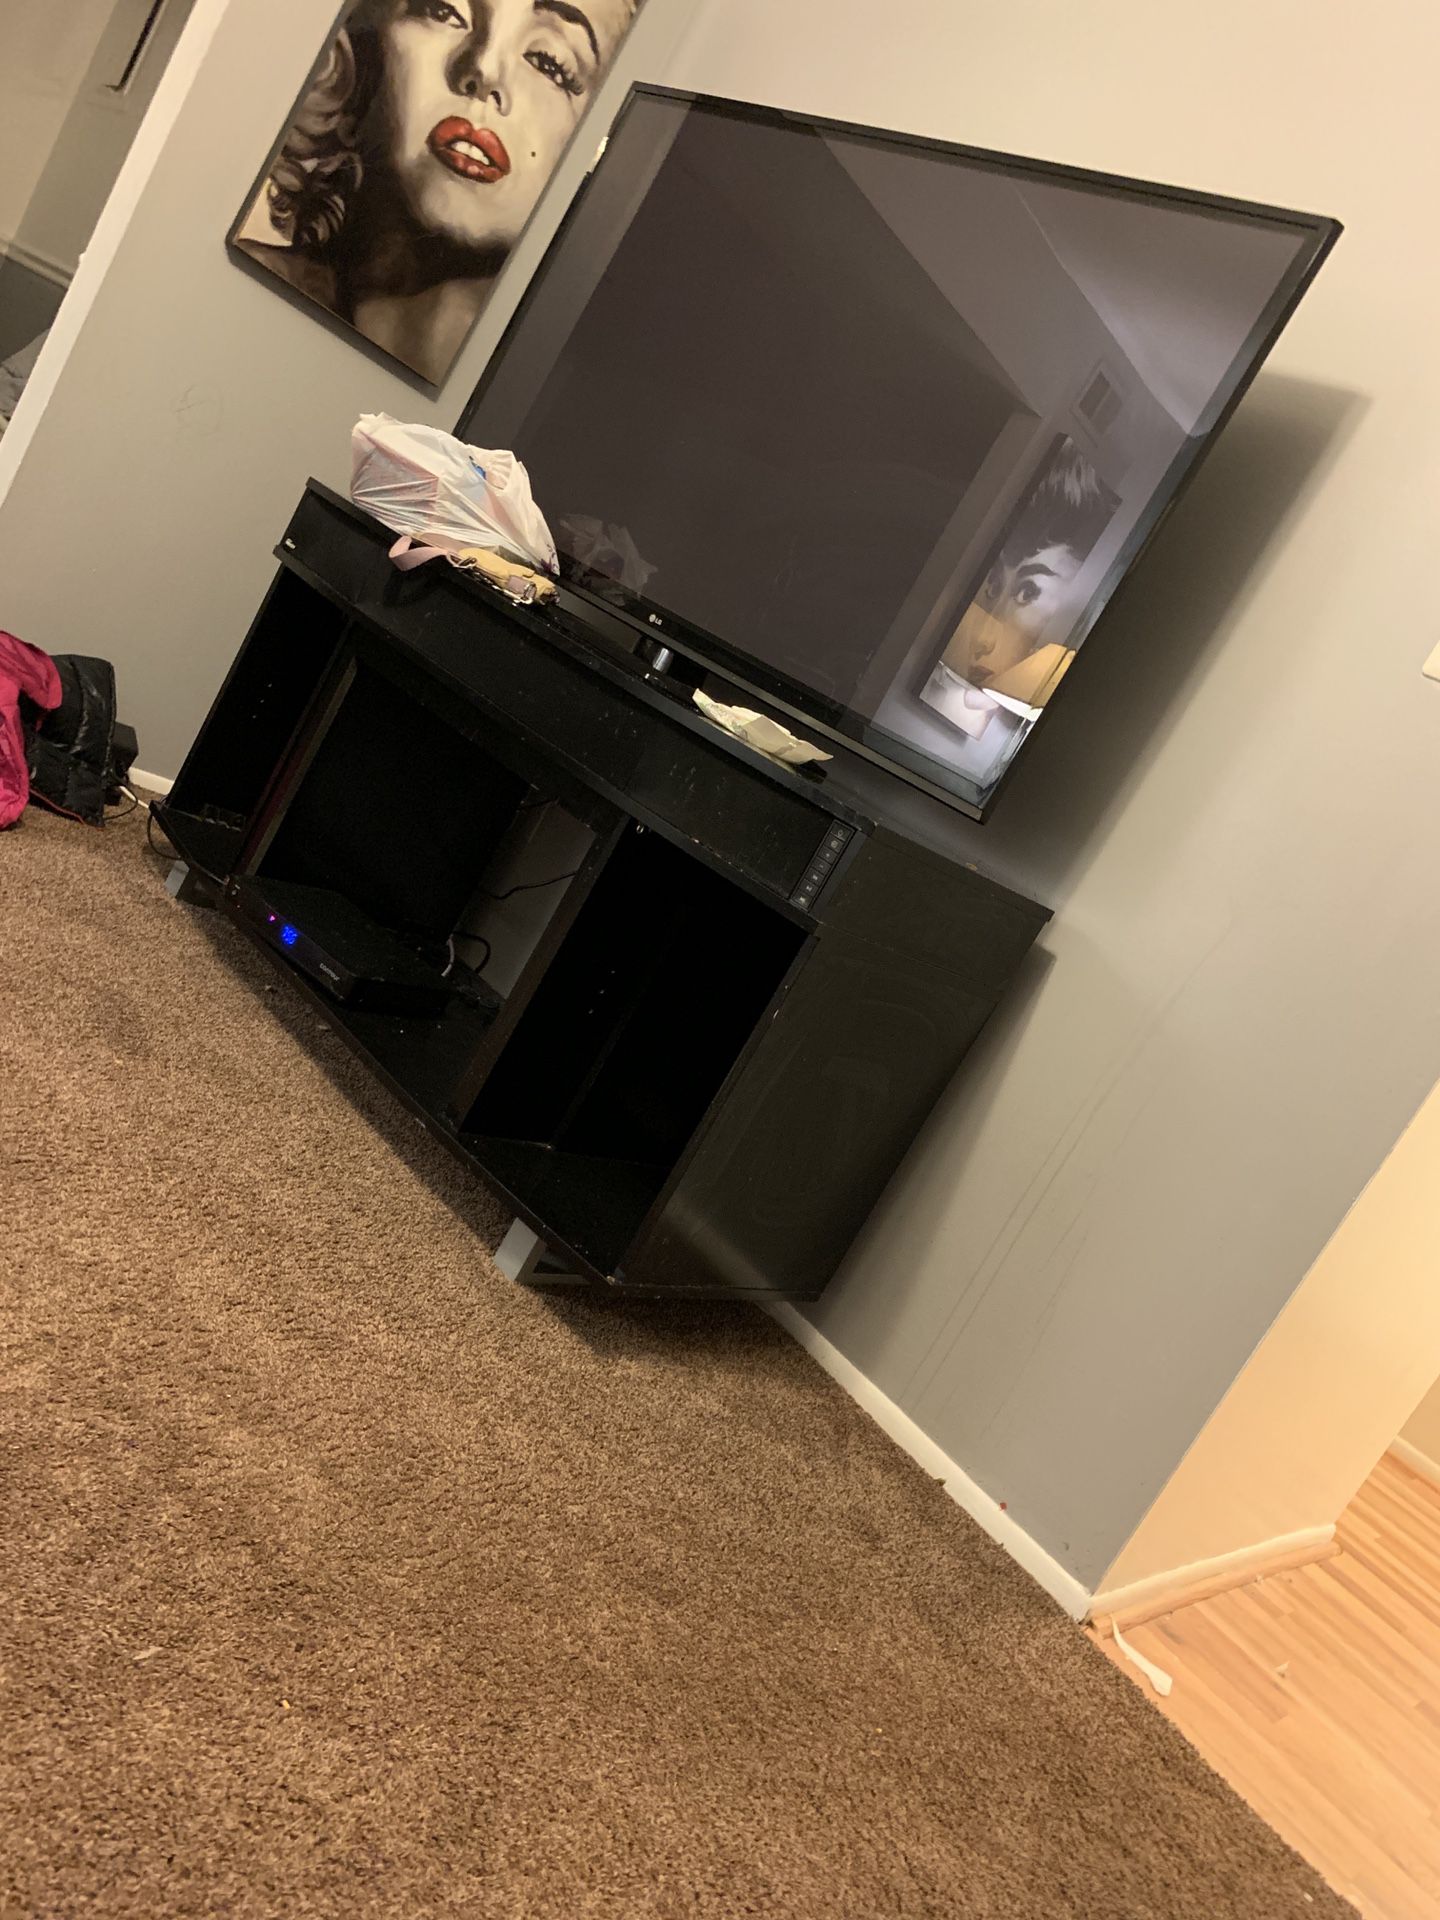 60incH LG TV WHIT STAND